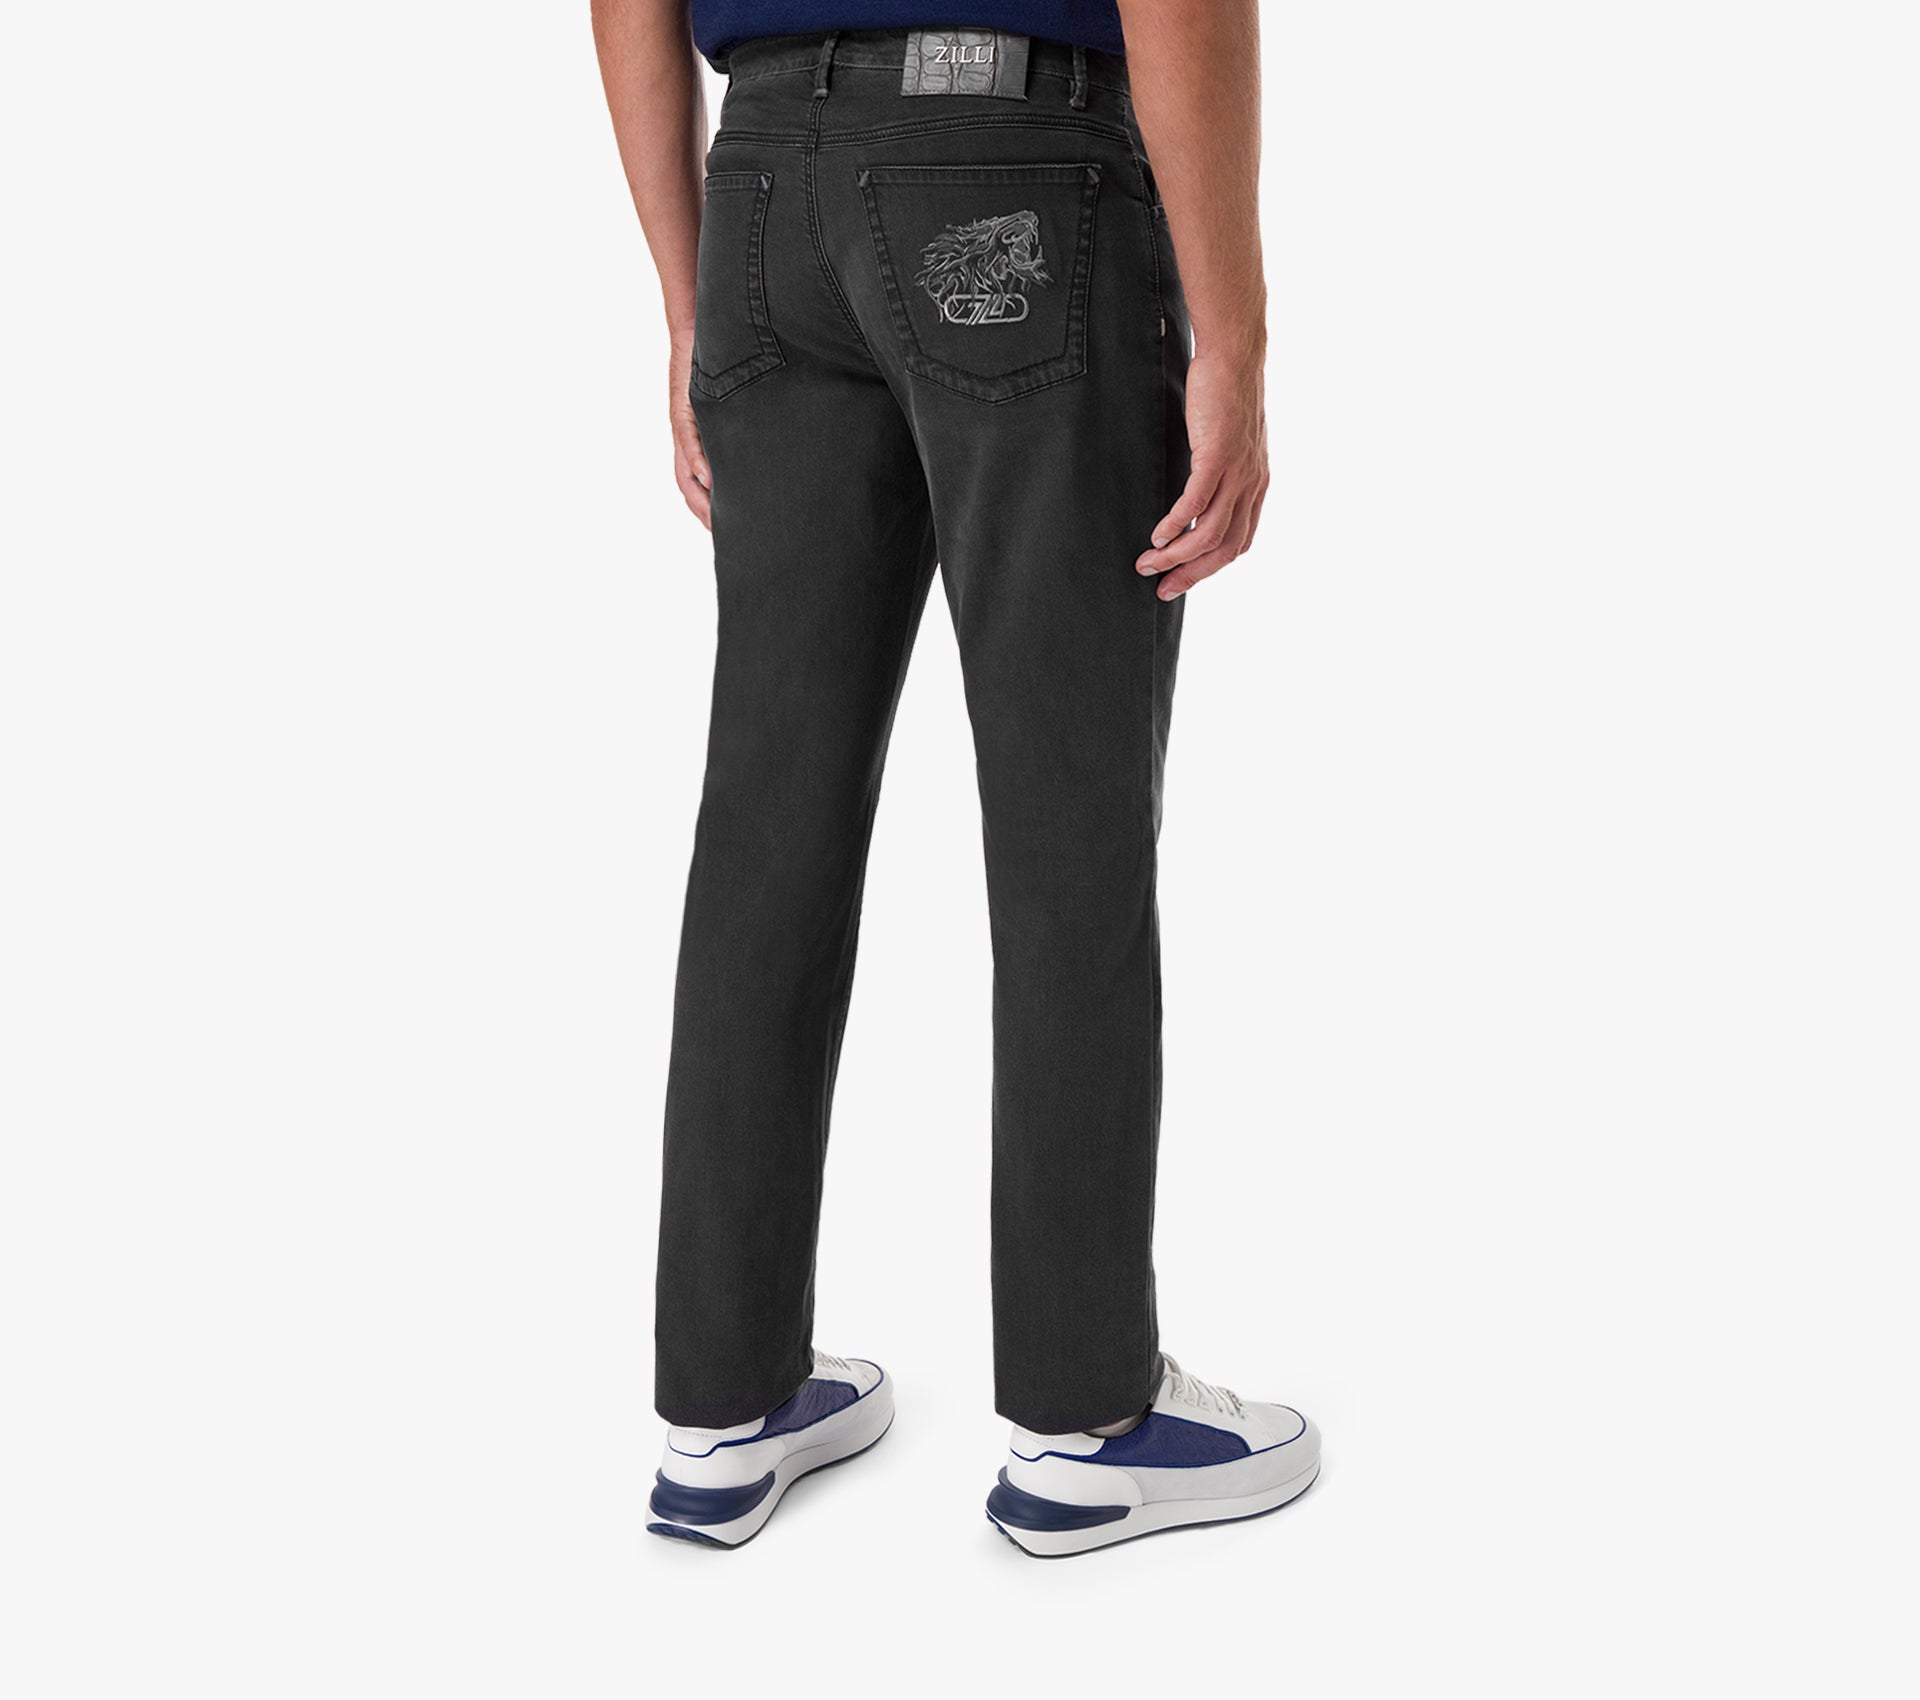 Zilli Slim Fit Jeans with Alligator Skin Patch